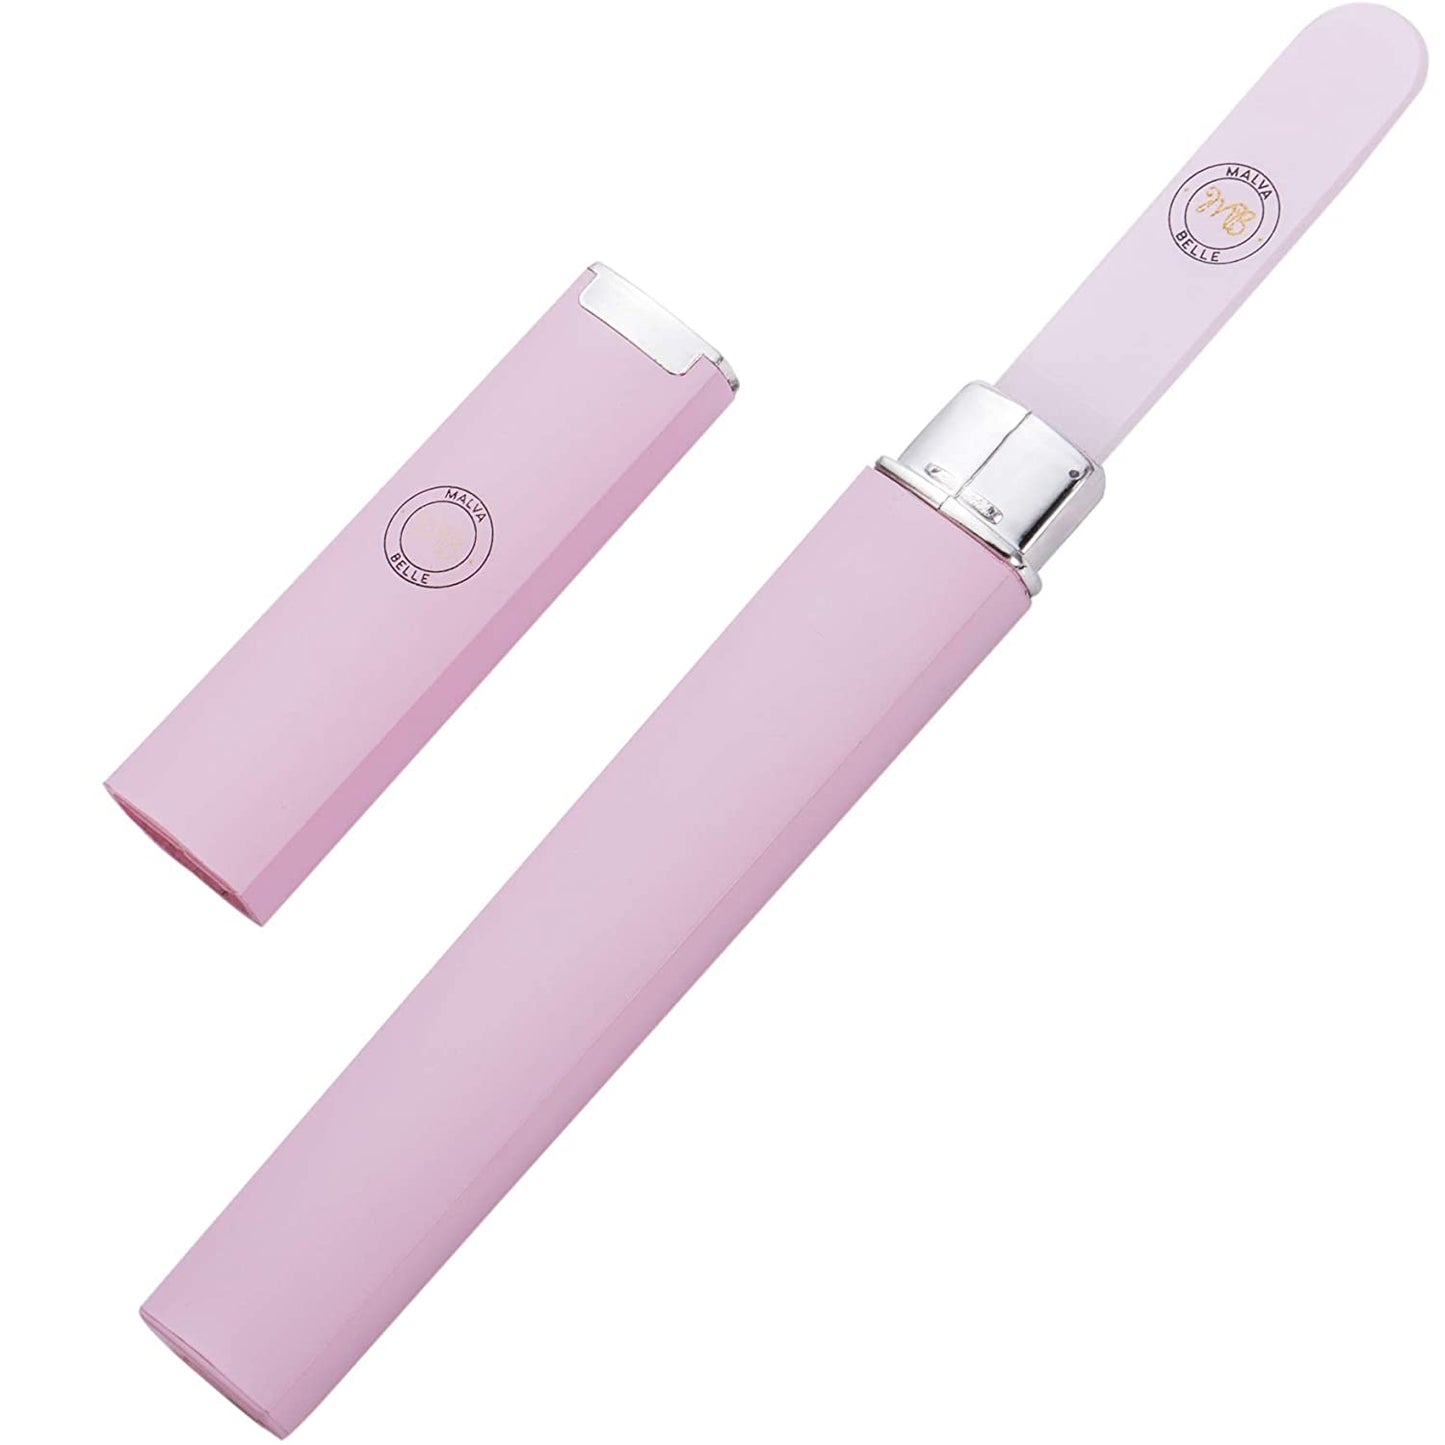 Crystal Glass Nail File with Protective Case - Pastel Lilac, 2mm